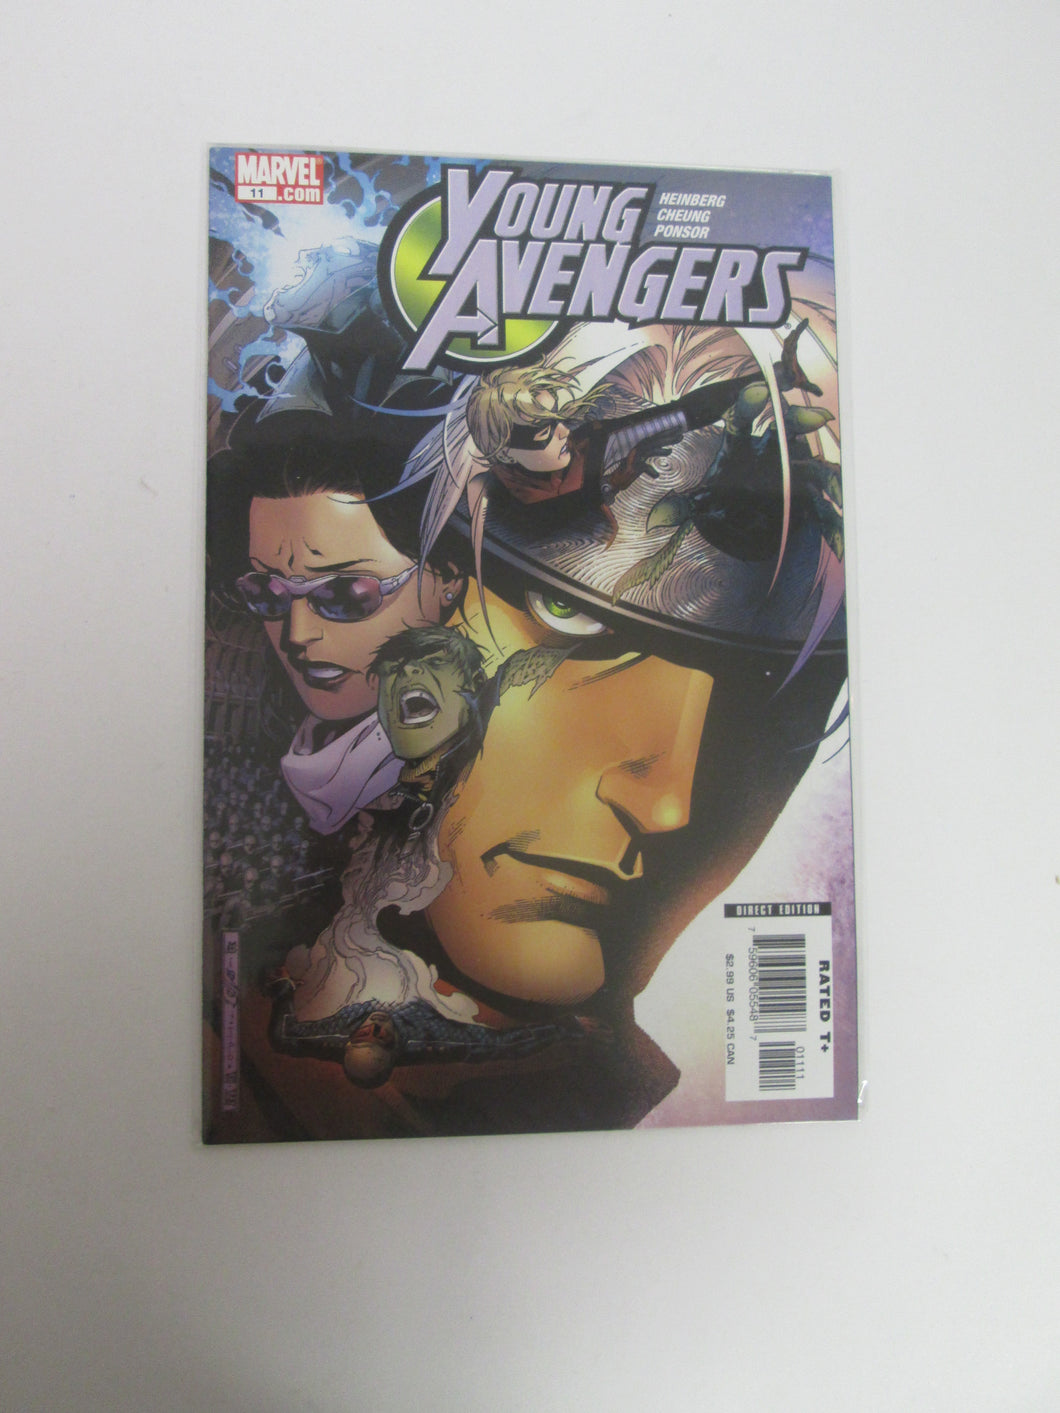 Young Avengers #11 (Marvel)